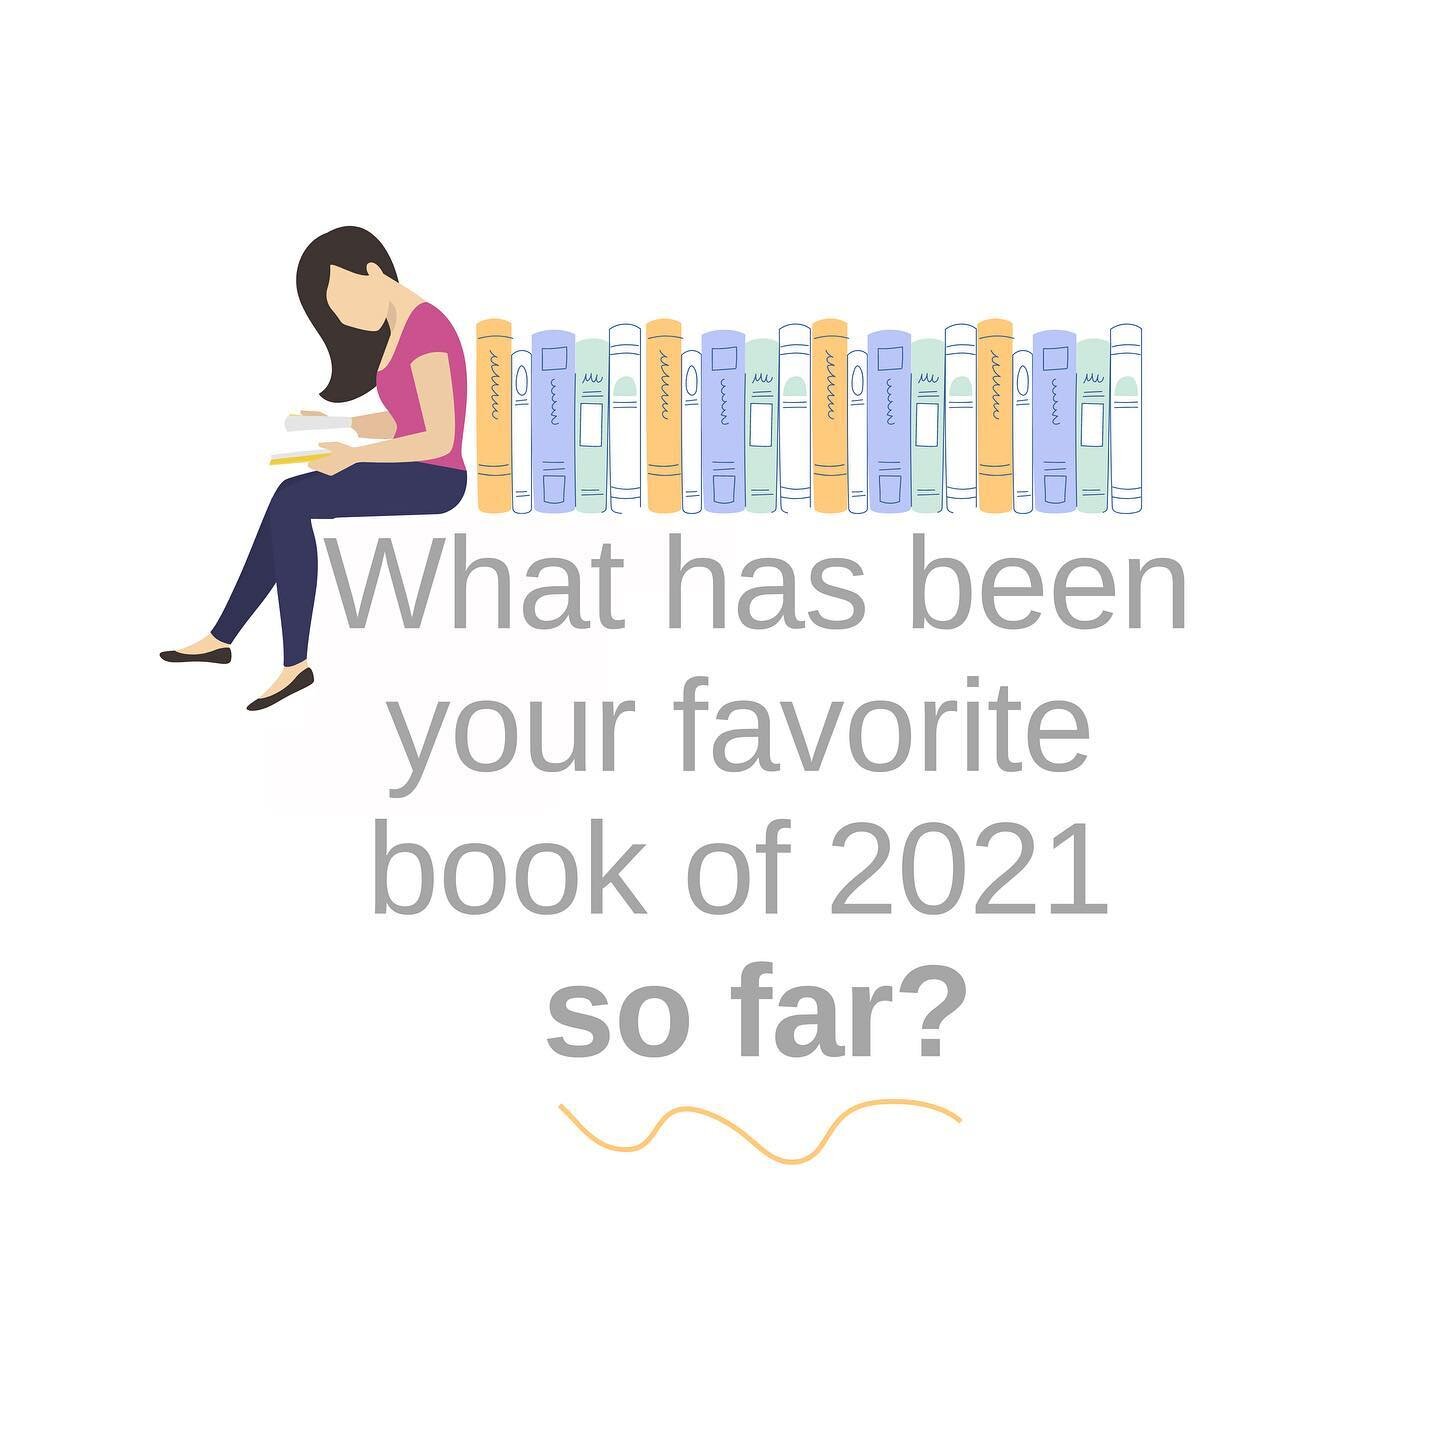 You made it to the end of Monday! YAY! Give yourself a round of applause! 👏👏👏 Now we need some inspo for the rest of the week! Tell us: What&rsquo;s the beat 2021 book you&rsquo;ve read so far this year? Add to our #tbrpile in the comments below! 